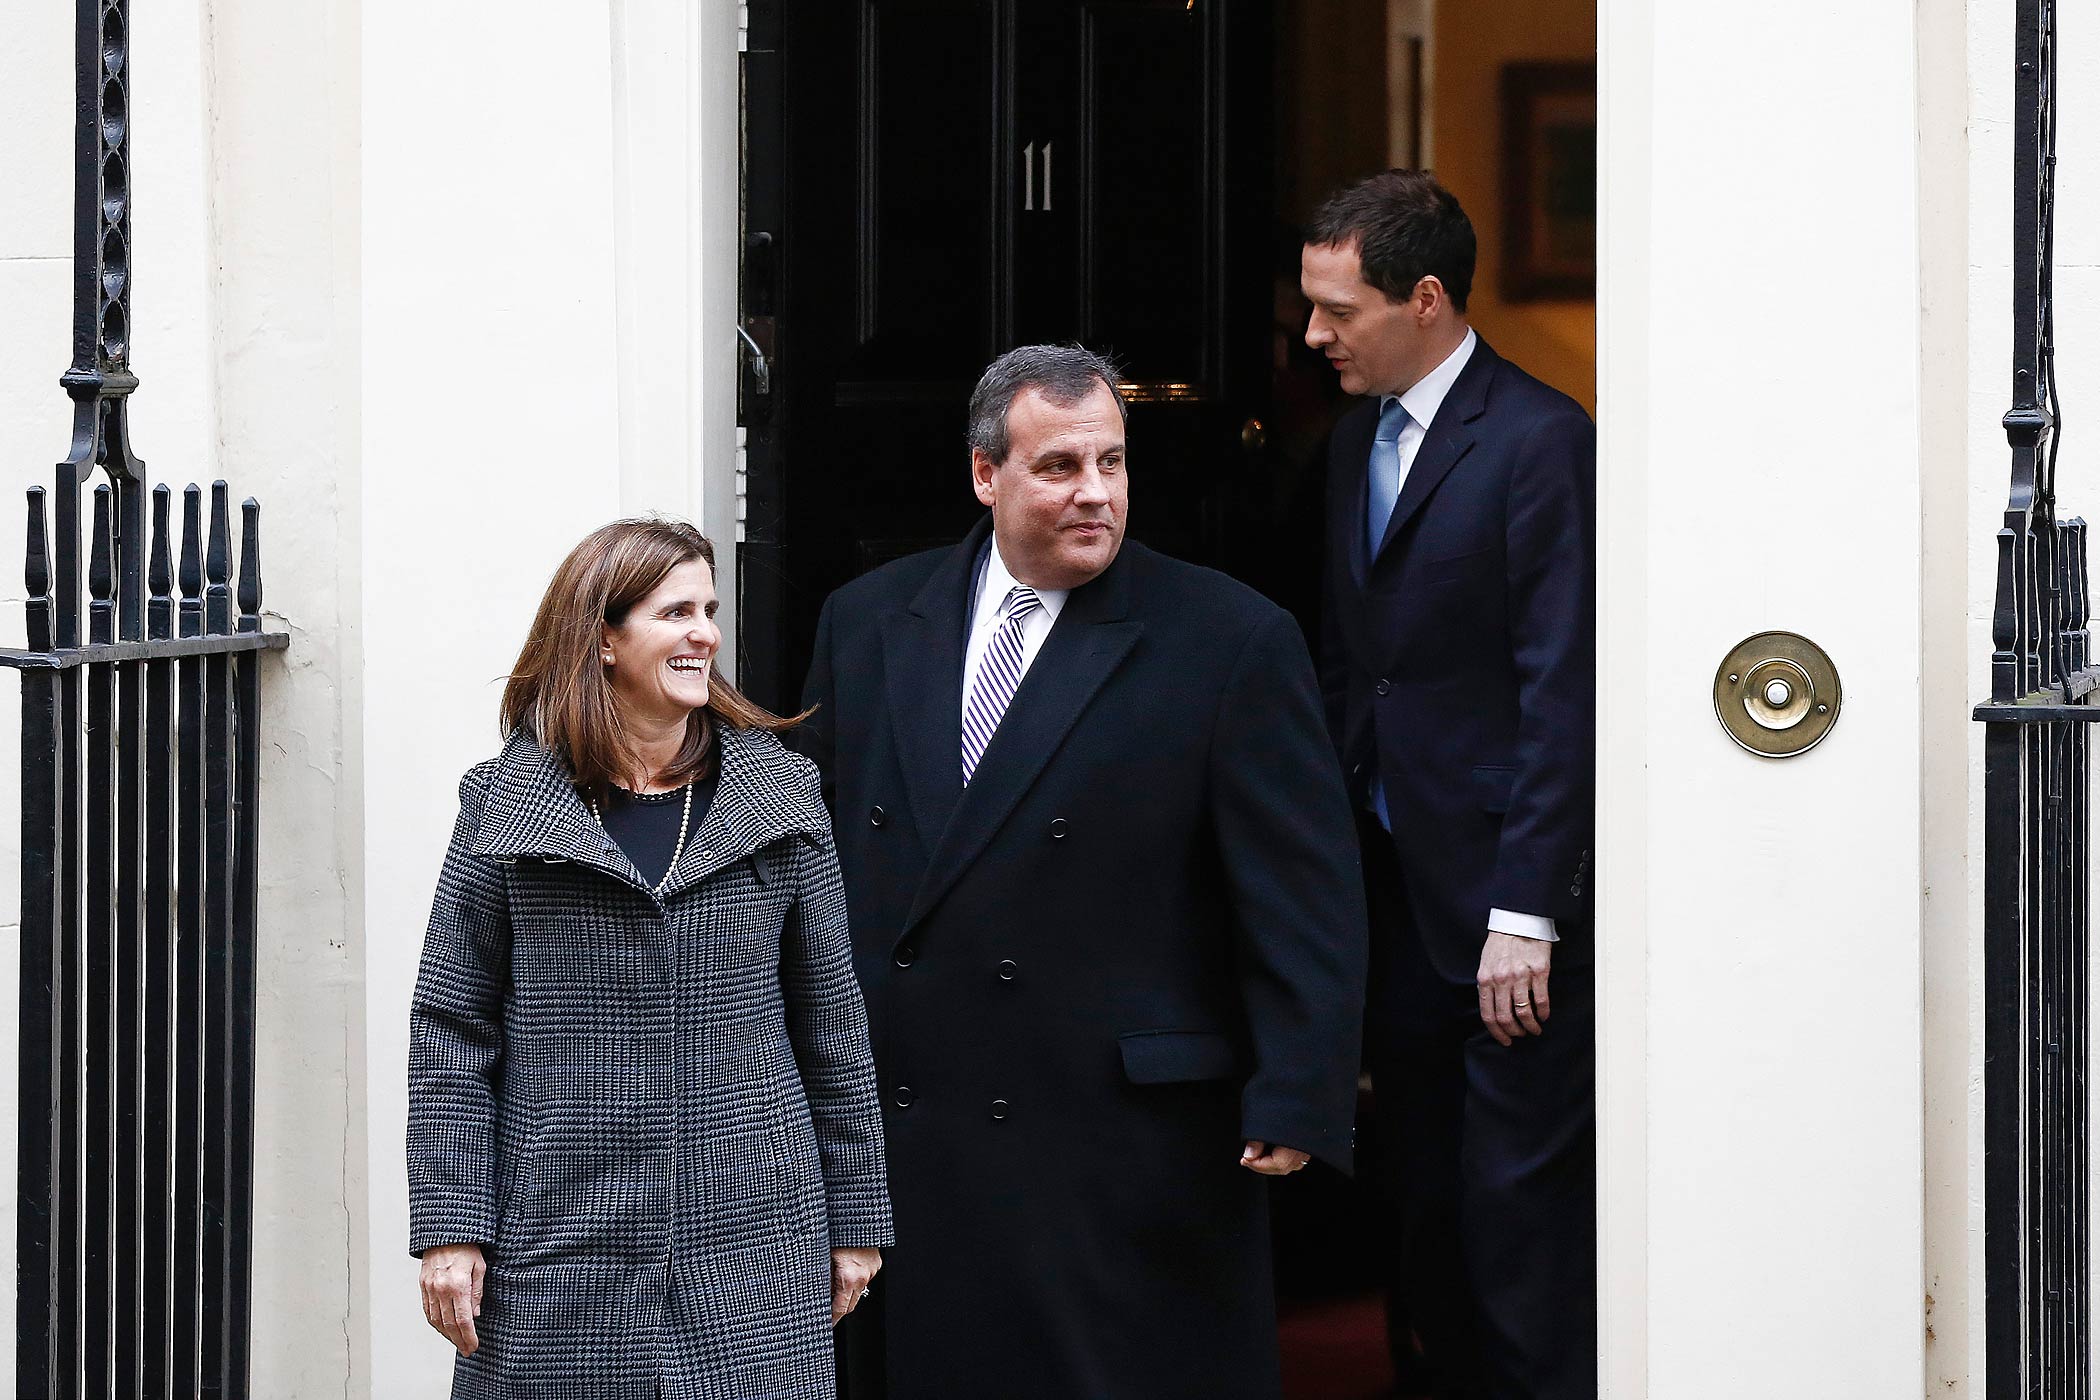 British Chancellor of the Exchequer George Osborne, right, follows Chris Christie, governor of New Jersey, center, and his wife Mary Pat Christie, out of 11 Downing Street following their meeting in London, U.K., on Feb. 3, 2015. (Simon Dawson—Bloomberg/Getty Images)